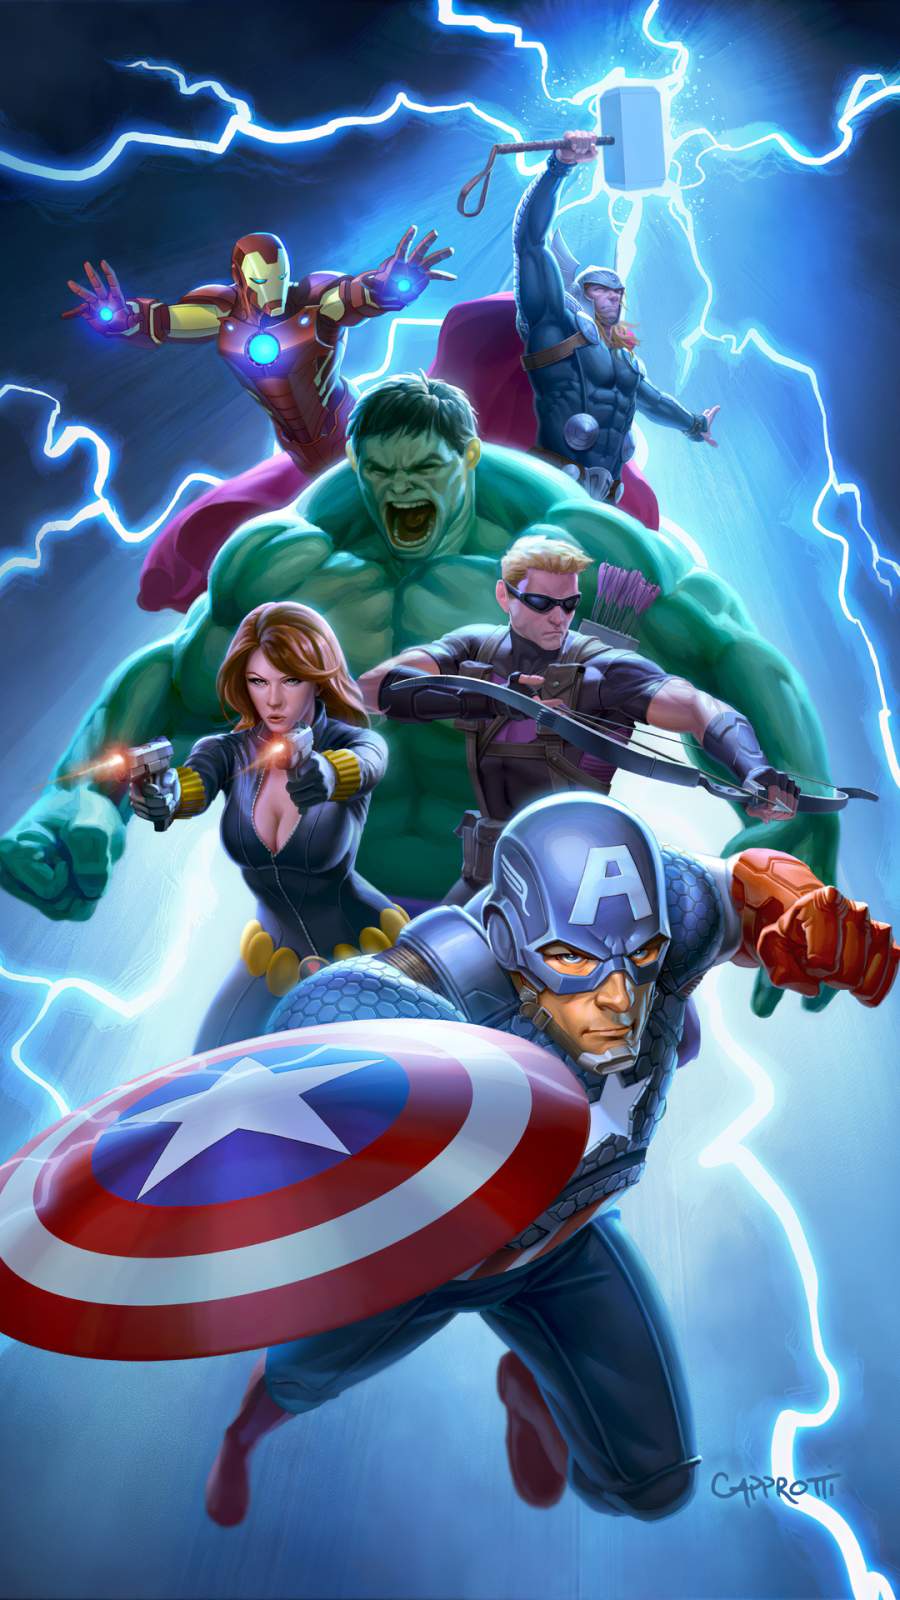 Avengers Animated Poster iPhone Wallpaper Wallpaper, iPhone Wallpaper